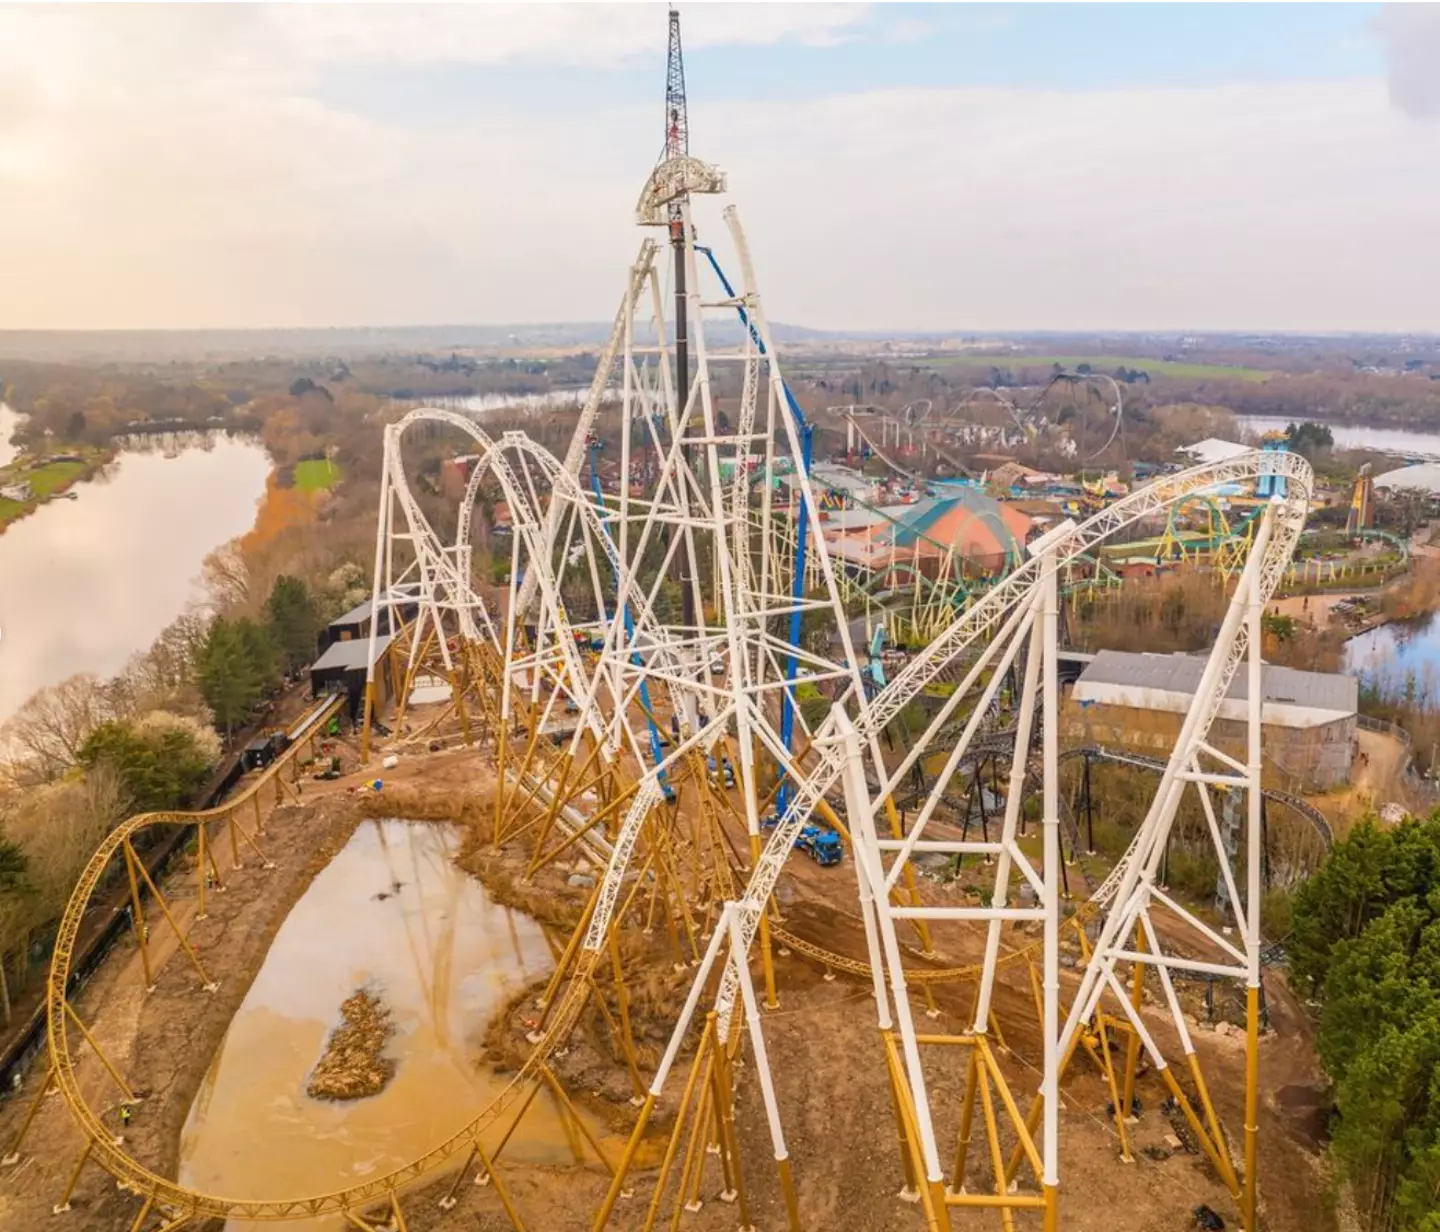 The ride is set to open this year.